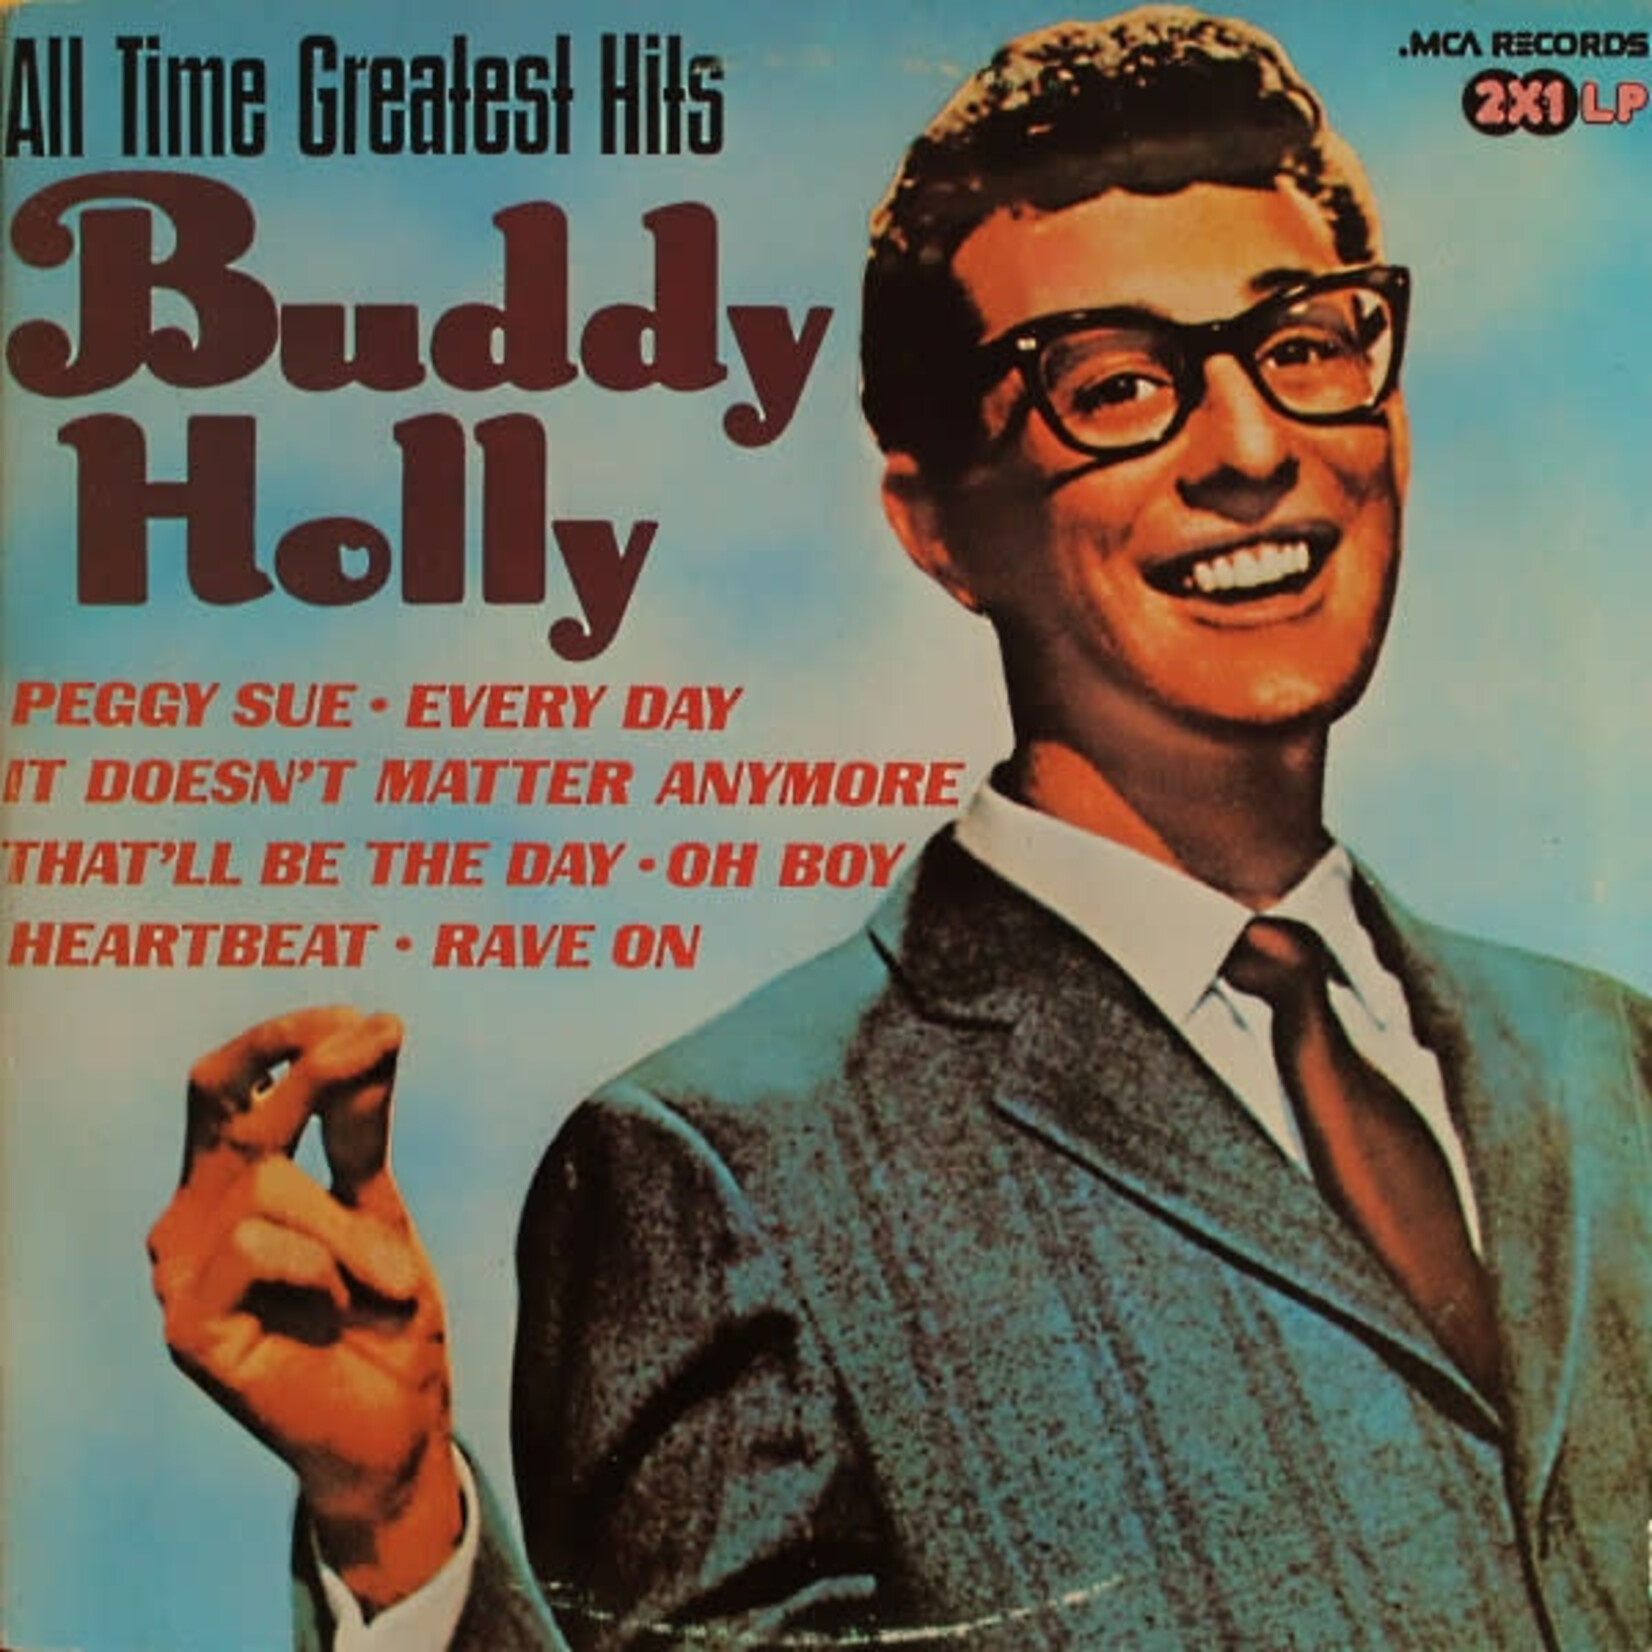 Buddy Holly – All Time Greatest Hits  1976